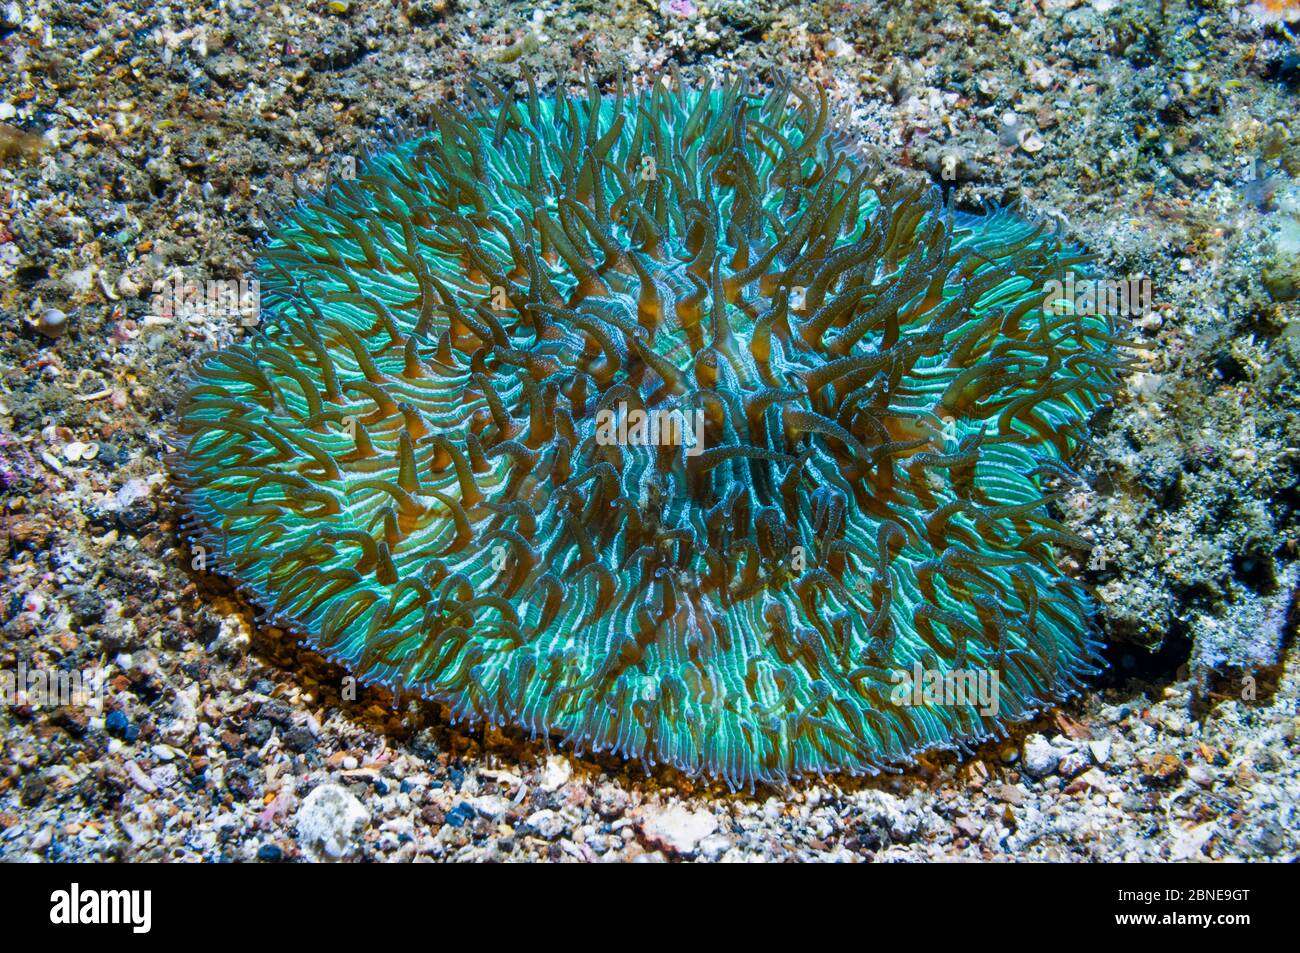 Mushroom coral (Fungia moluccensis) with polyps extended, fluorescing.  Lembeh, Sulawesi, Indonesia. Stock Photo